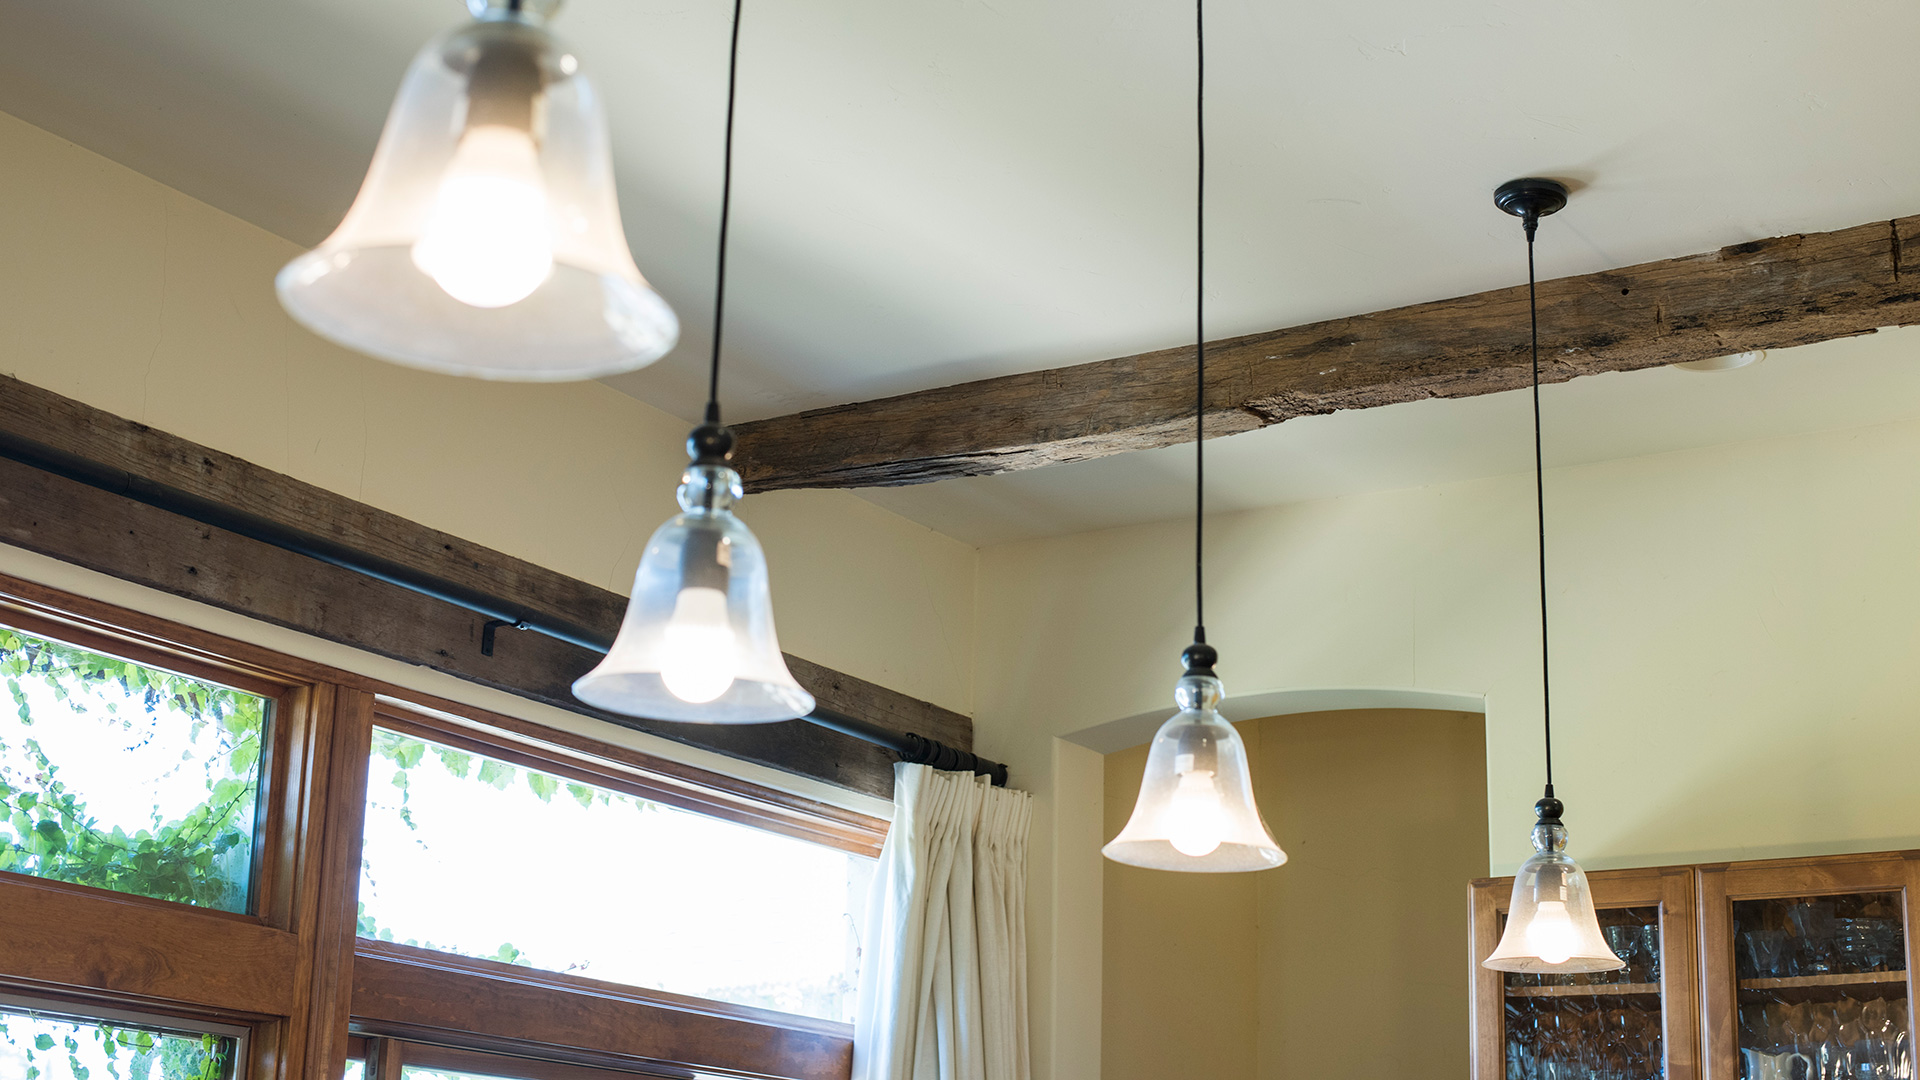 Looking up at hanging lights above kitchen, with exposed wooden ceiling beams behind.